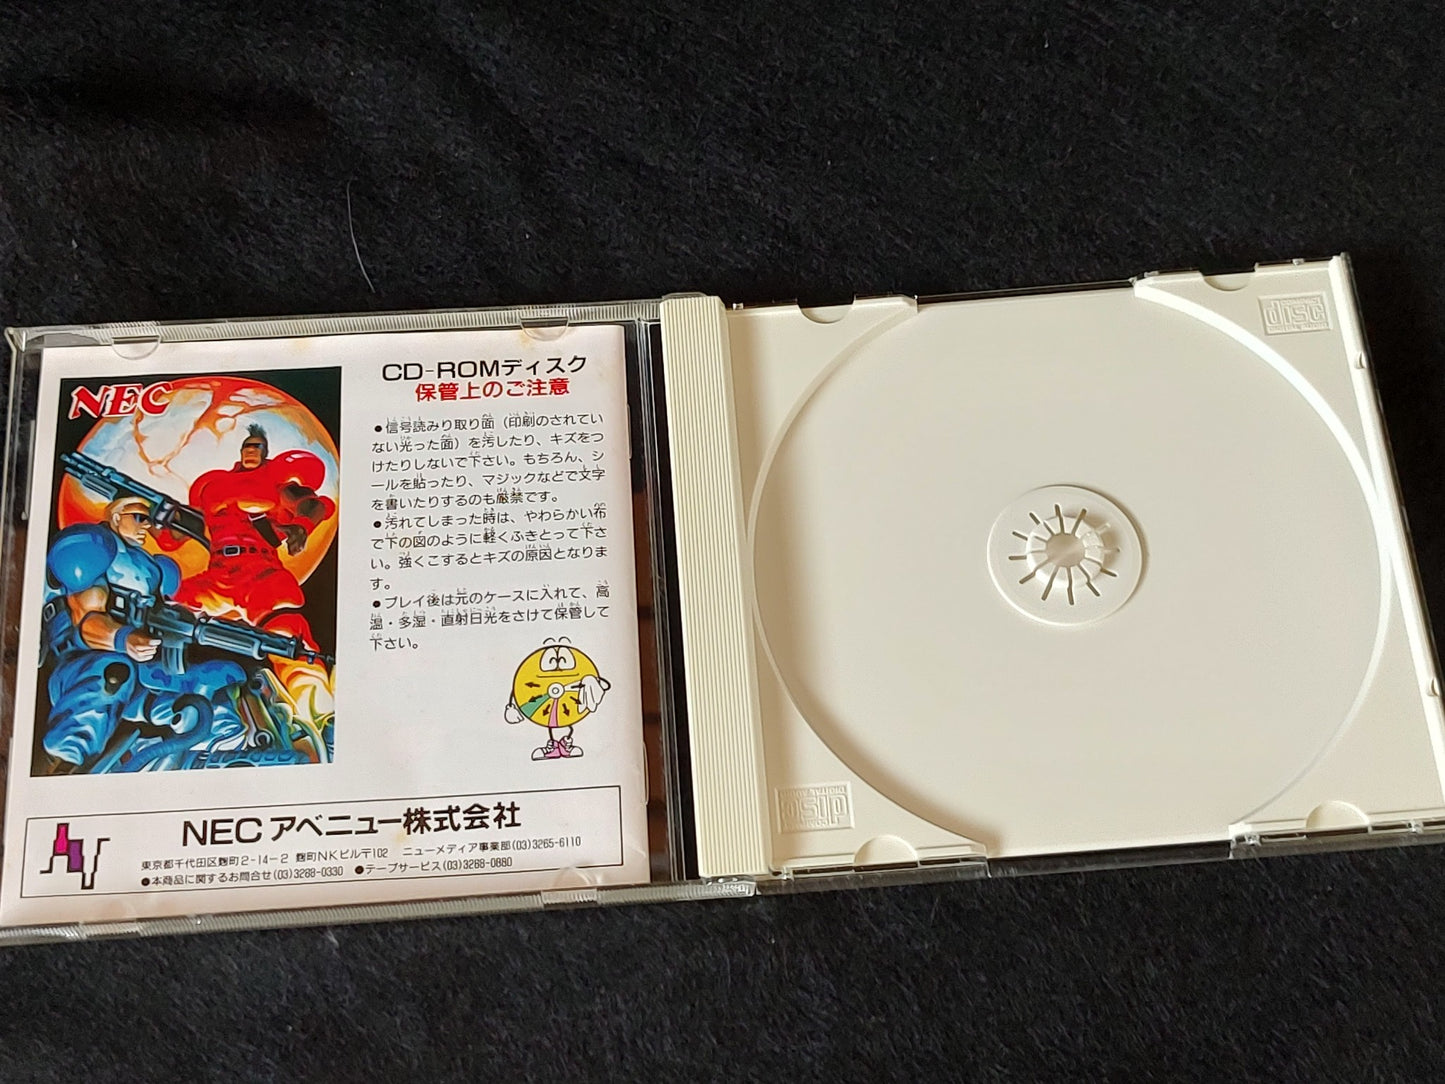 Forgotten World Avenue pad 3 Limited edition PC Engine CD-ROM2, Working-f0809-